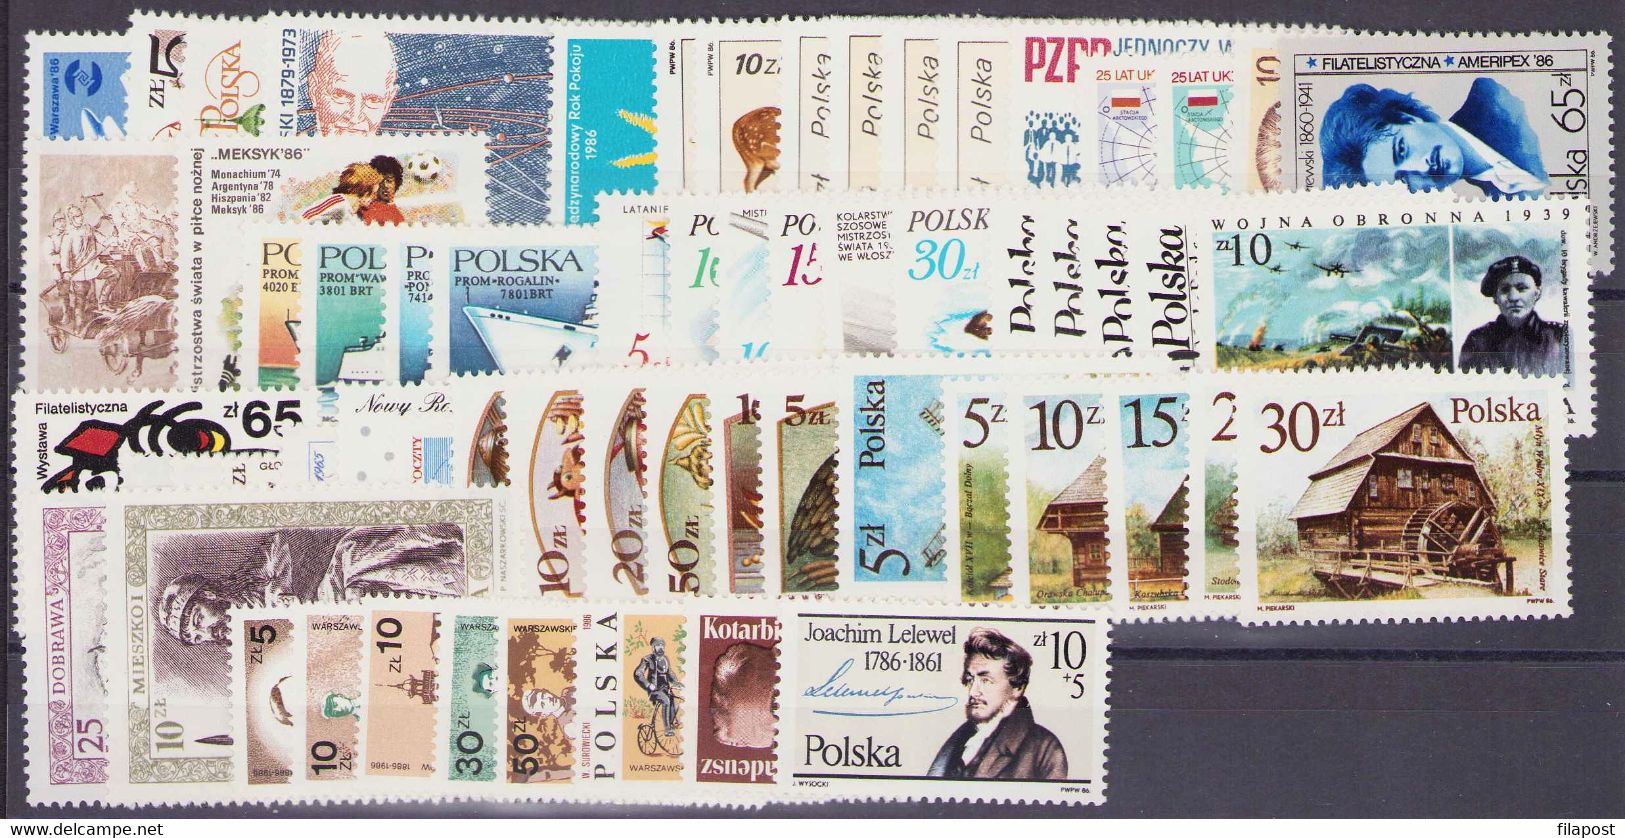 Poland 1986 Full Year / Polsteam, Cargo Ship, Ferry, Transport, FIFA, Birds Wild Game, Invasion, Cycling MNH** - Années Complètes